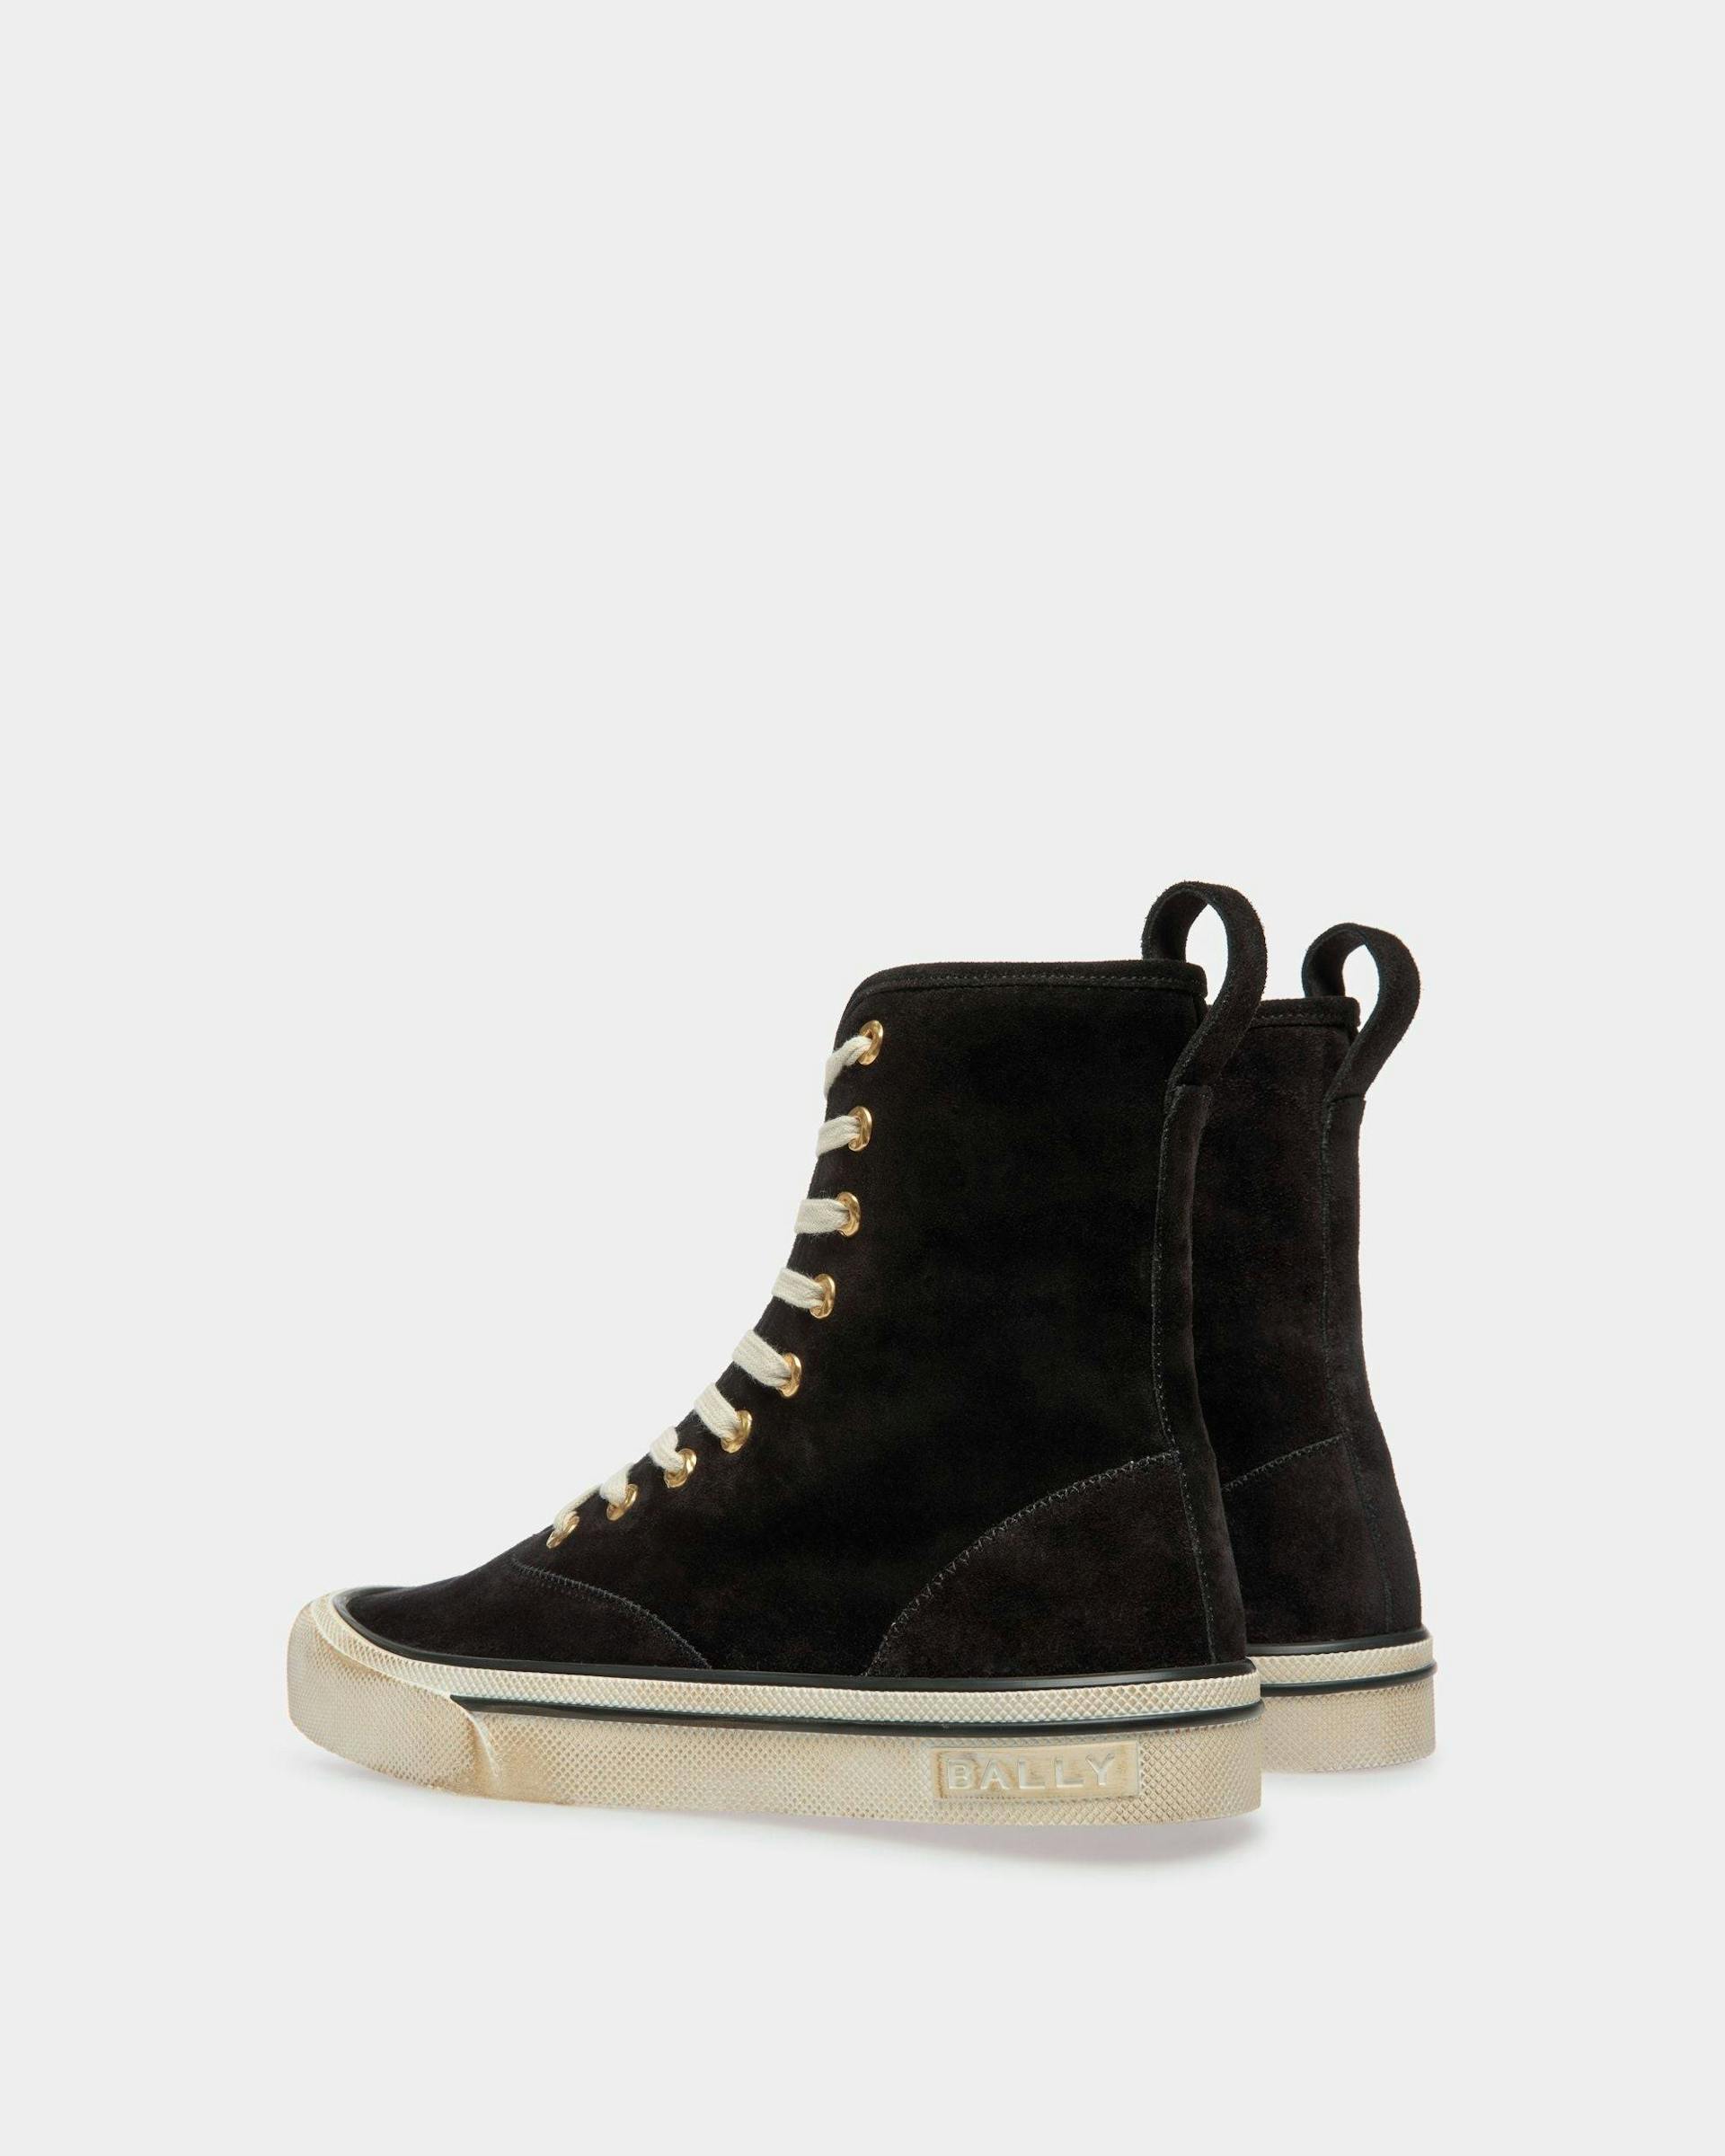 Men's Santa Ana High Top Sneakers In Black Suede | Bally | Still Life 3/4 Back